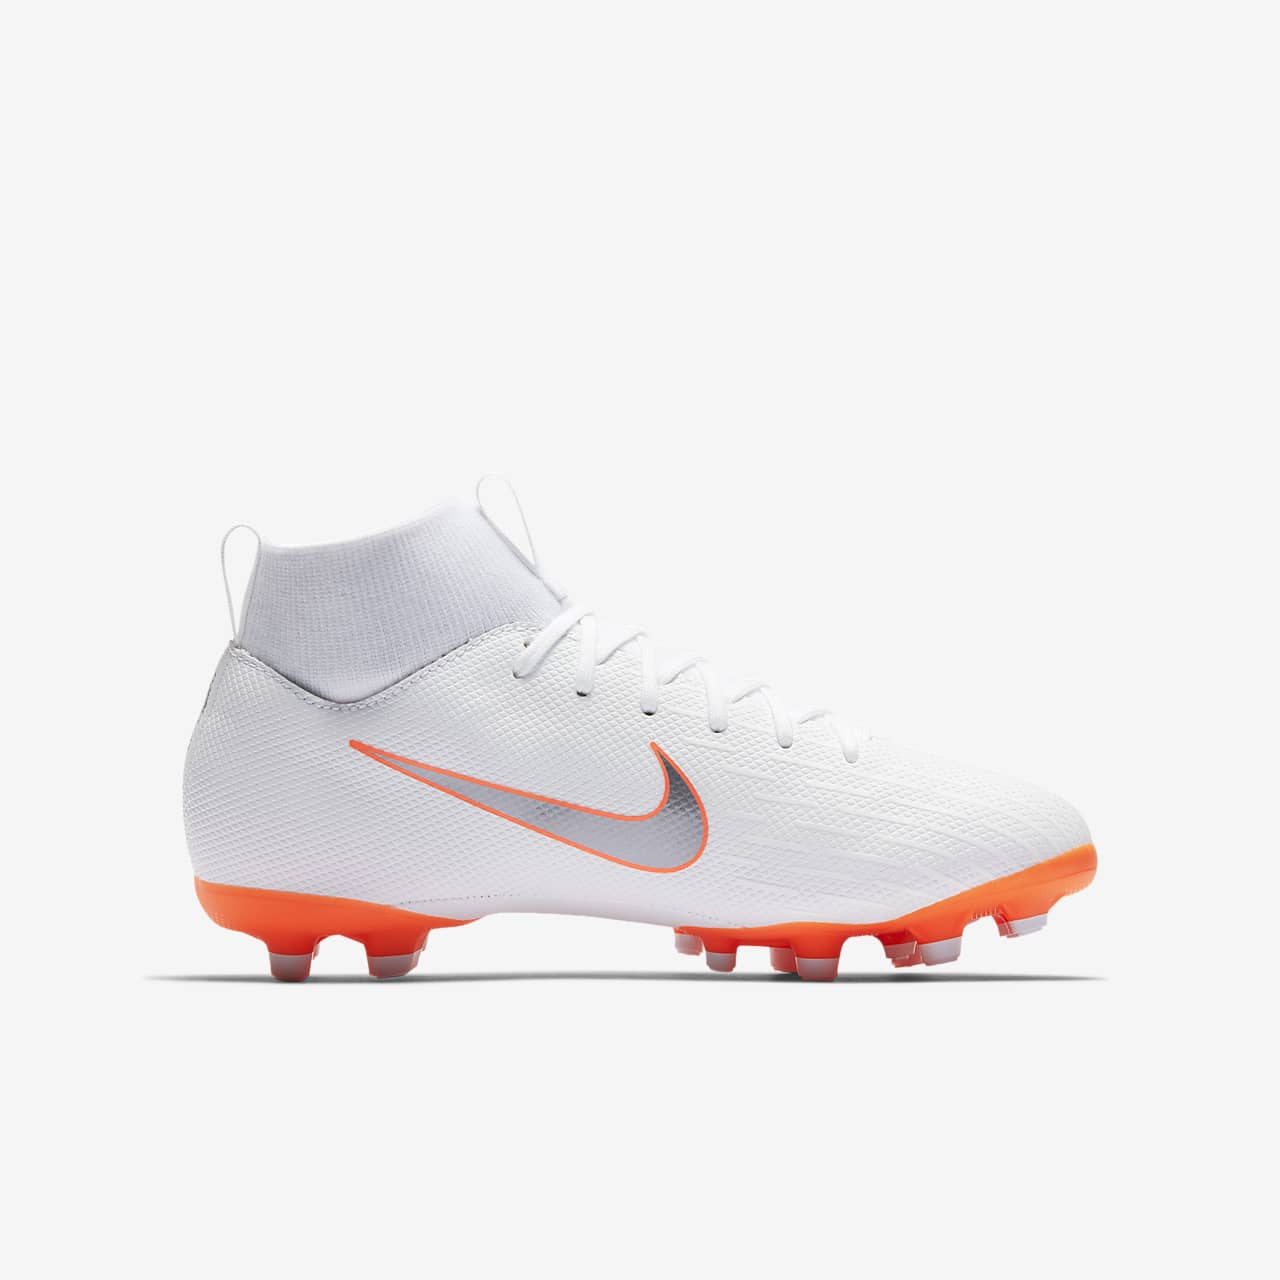 Jr. Superfly VI Academy JDI Younger/Older Kids' Multi-Ground Football Boot. Nike IL